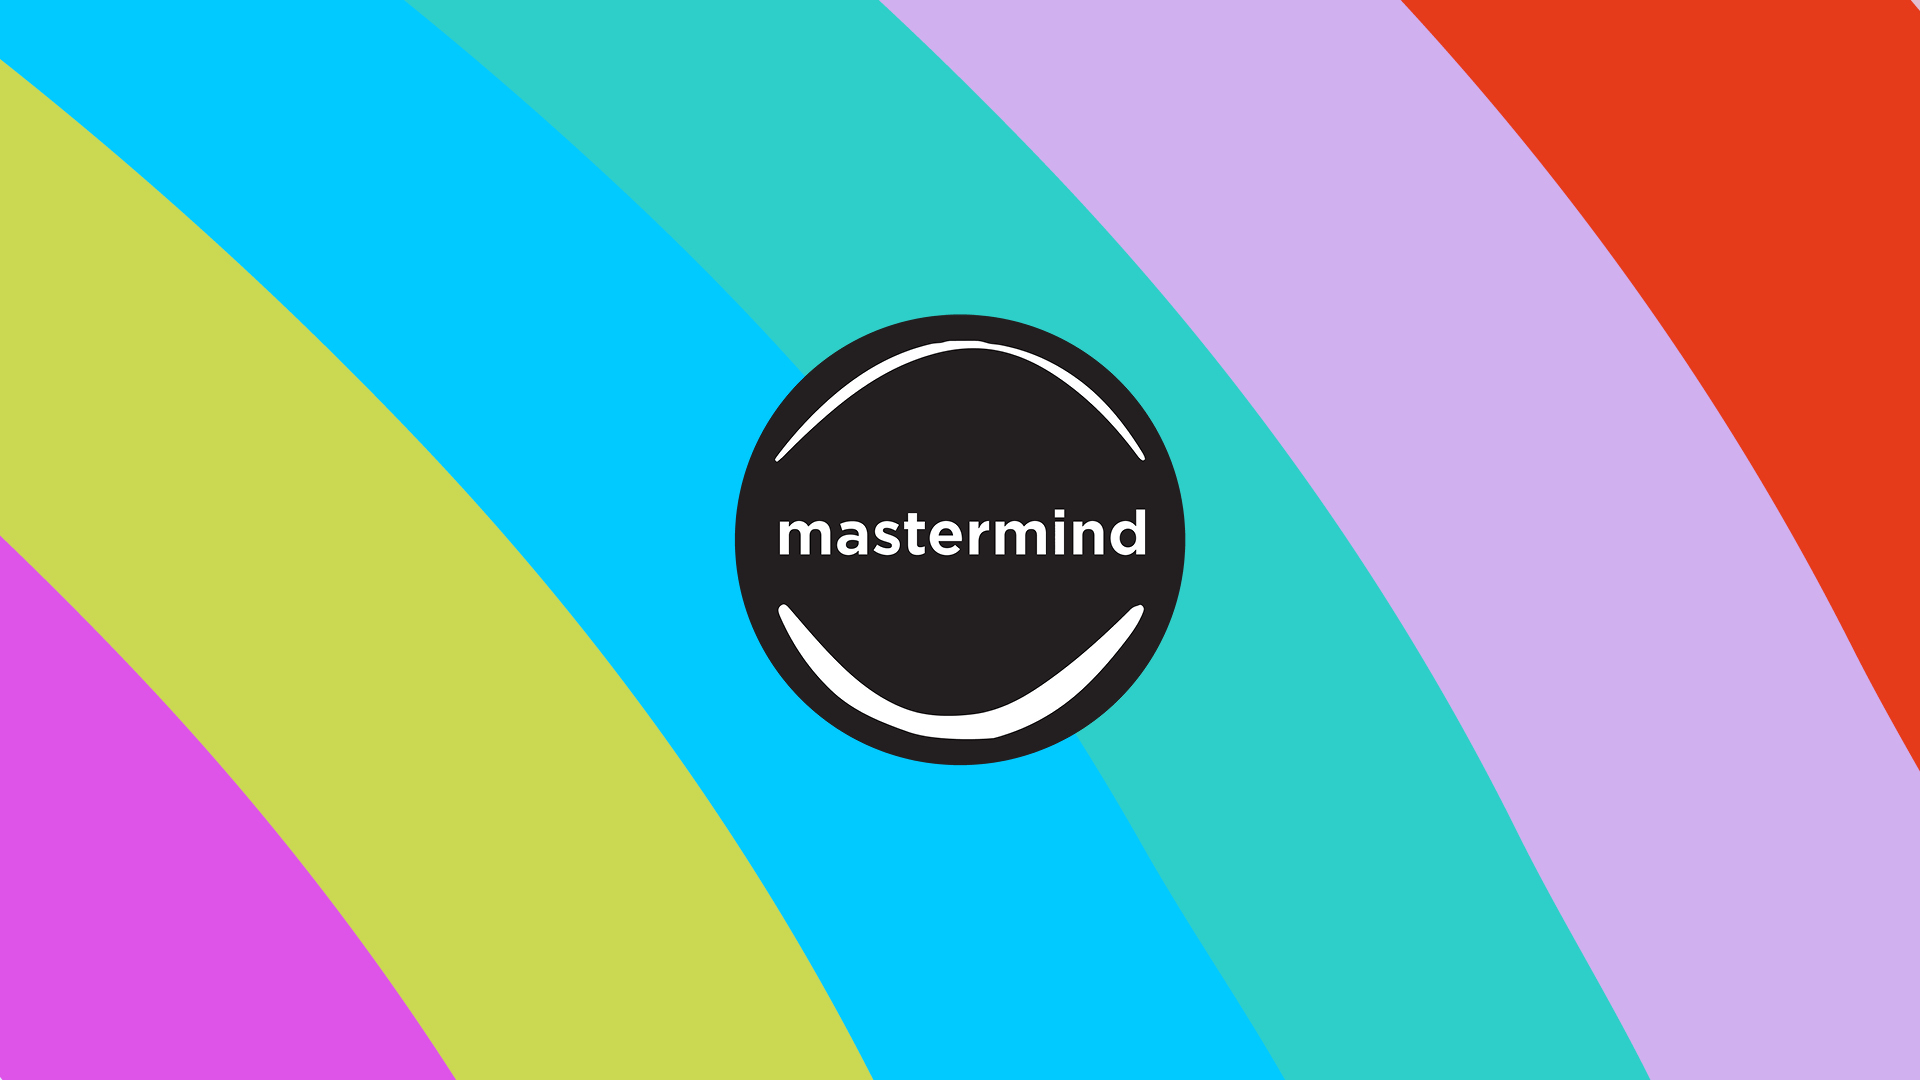 This is an image of the Mastermind rainbow and logo.